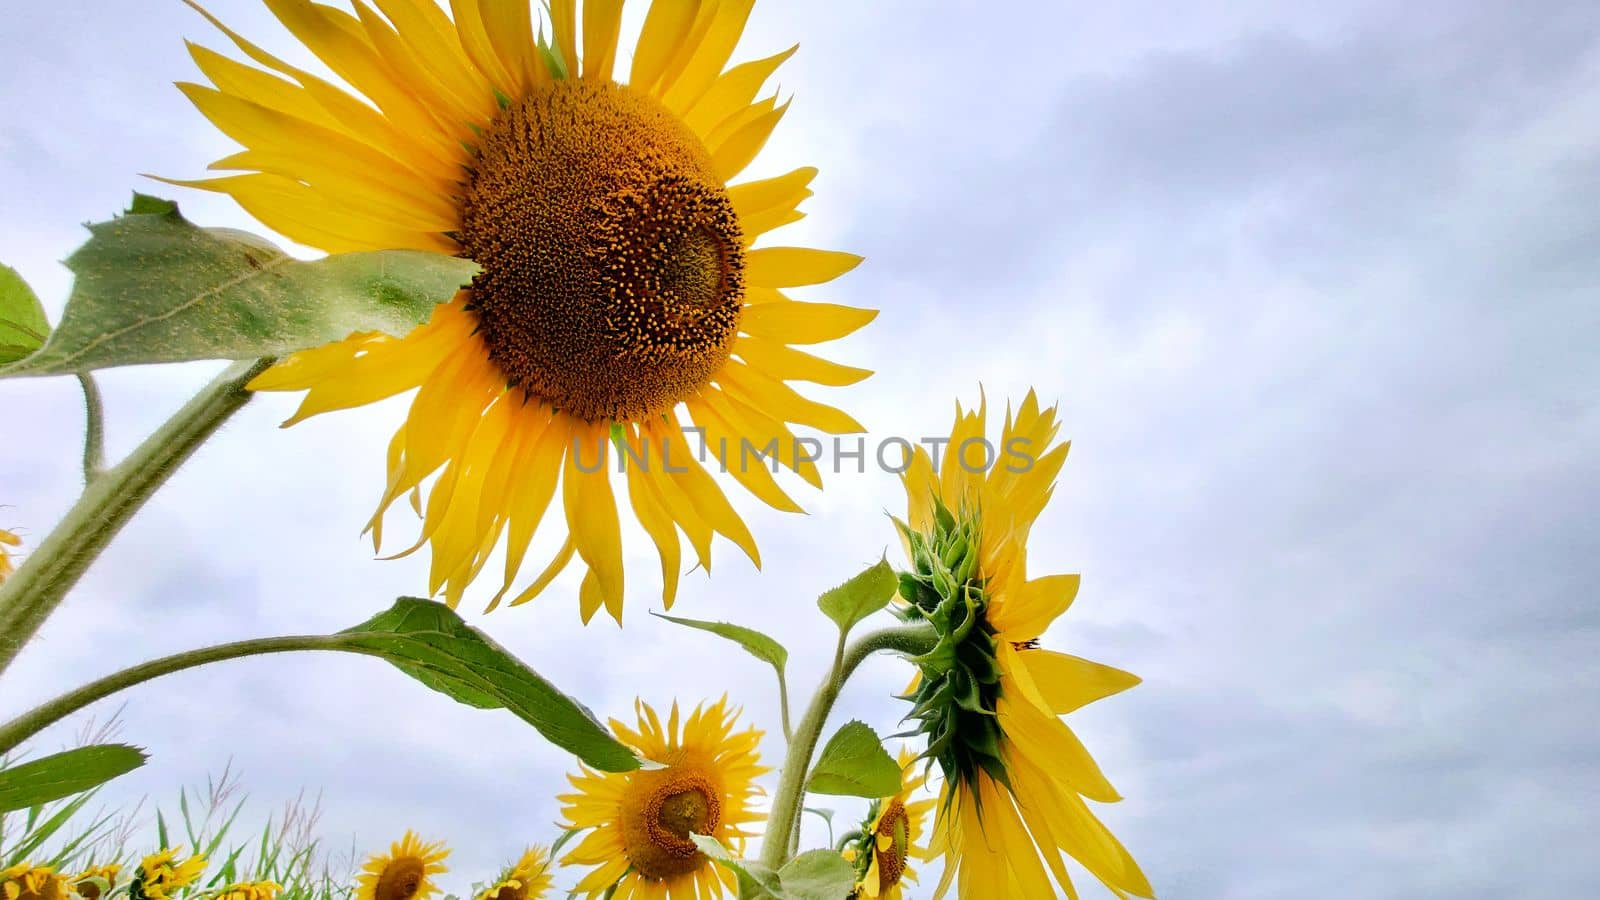 Bright yellow sunflowers growing in the field on a cloudy day by Mastak80